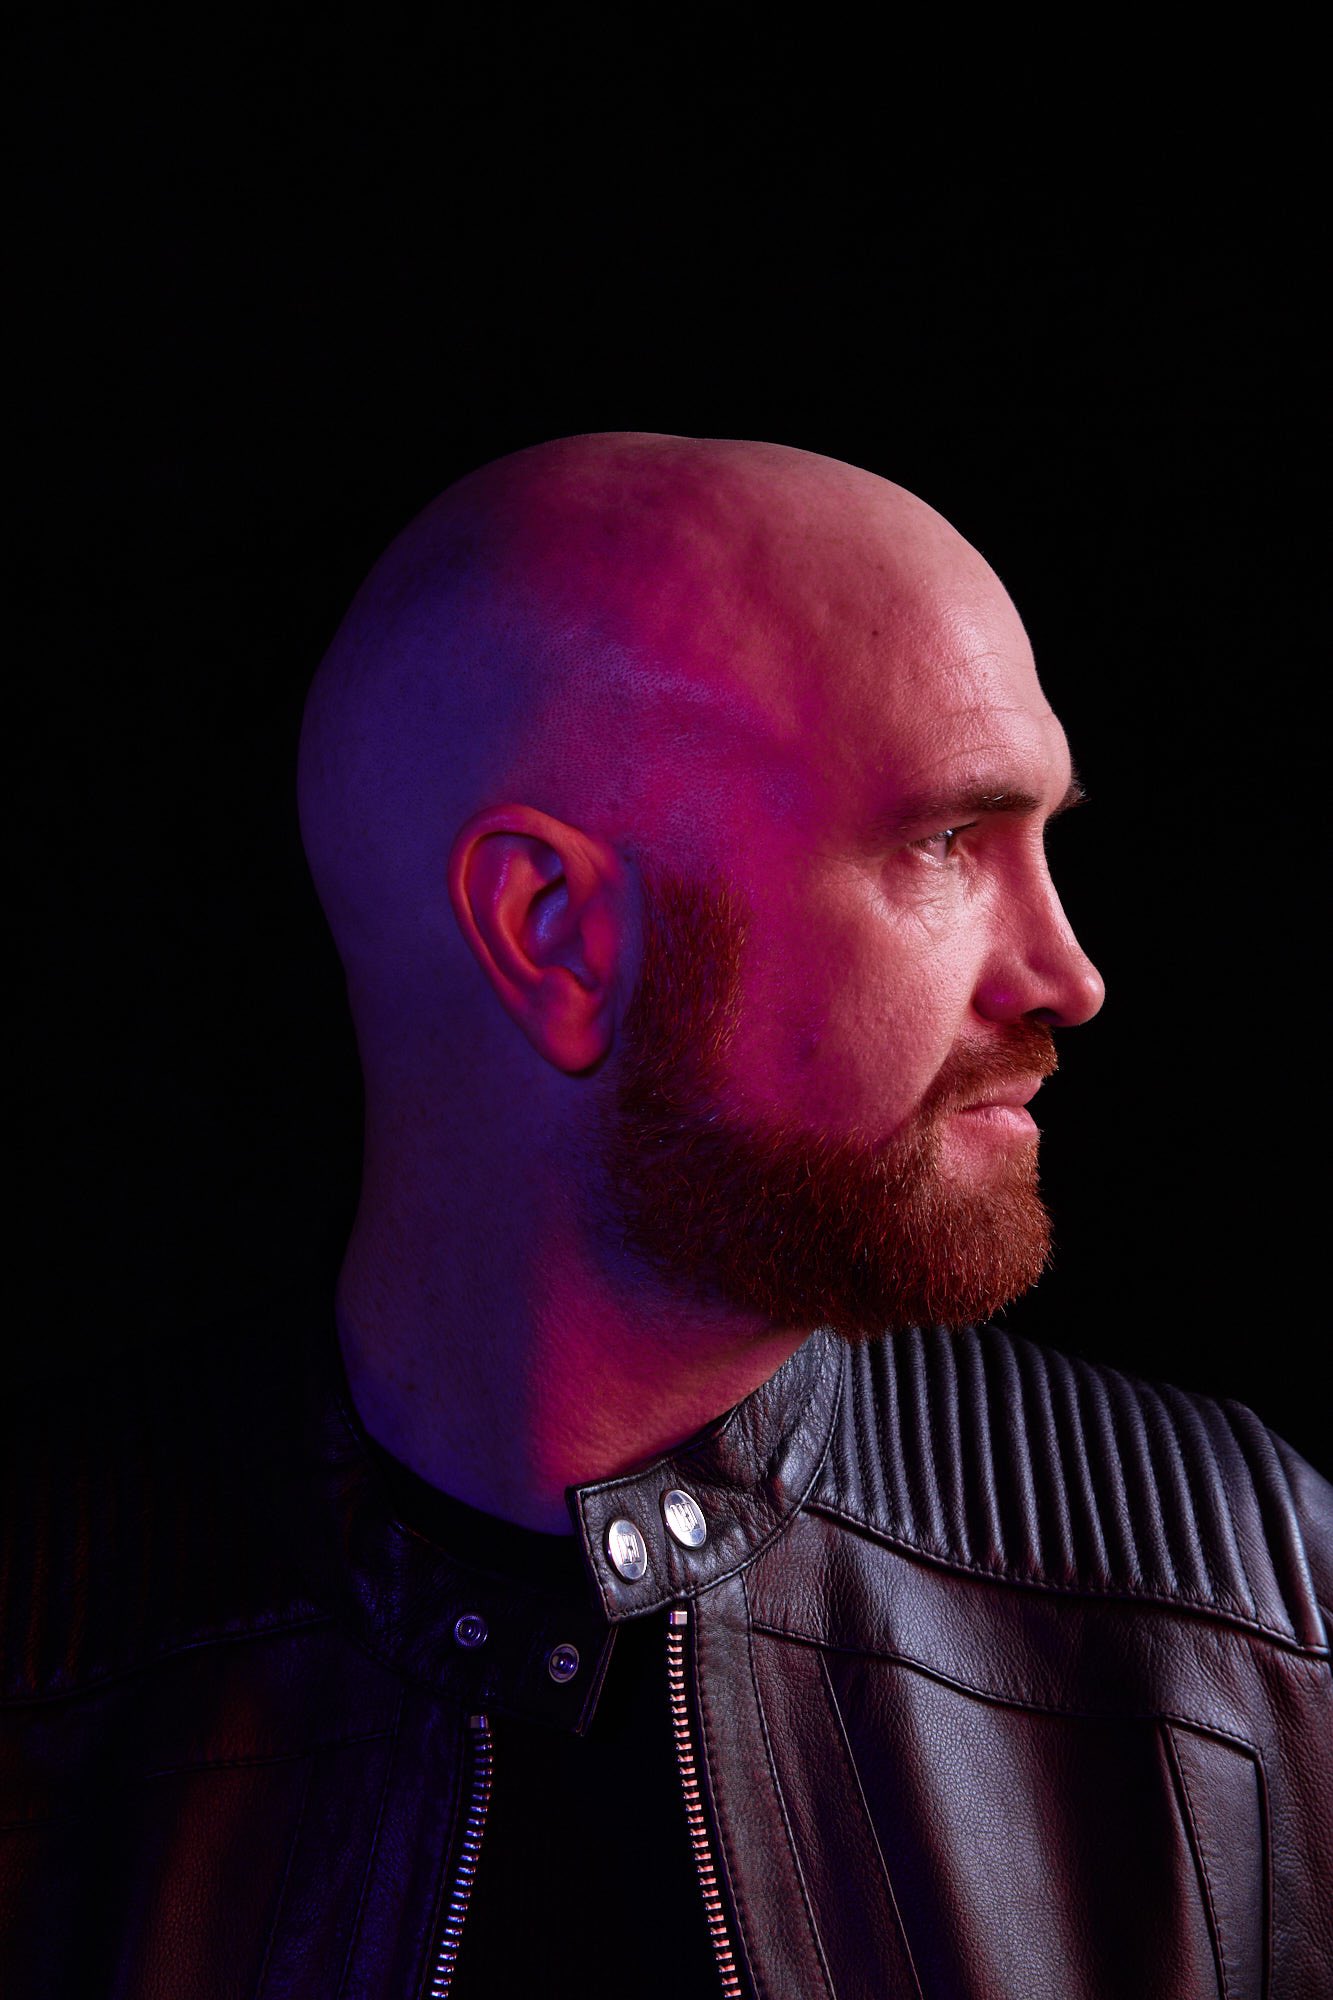 The Script Guitarist, Mark Sheehan, Died at Age 46